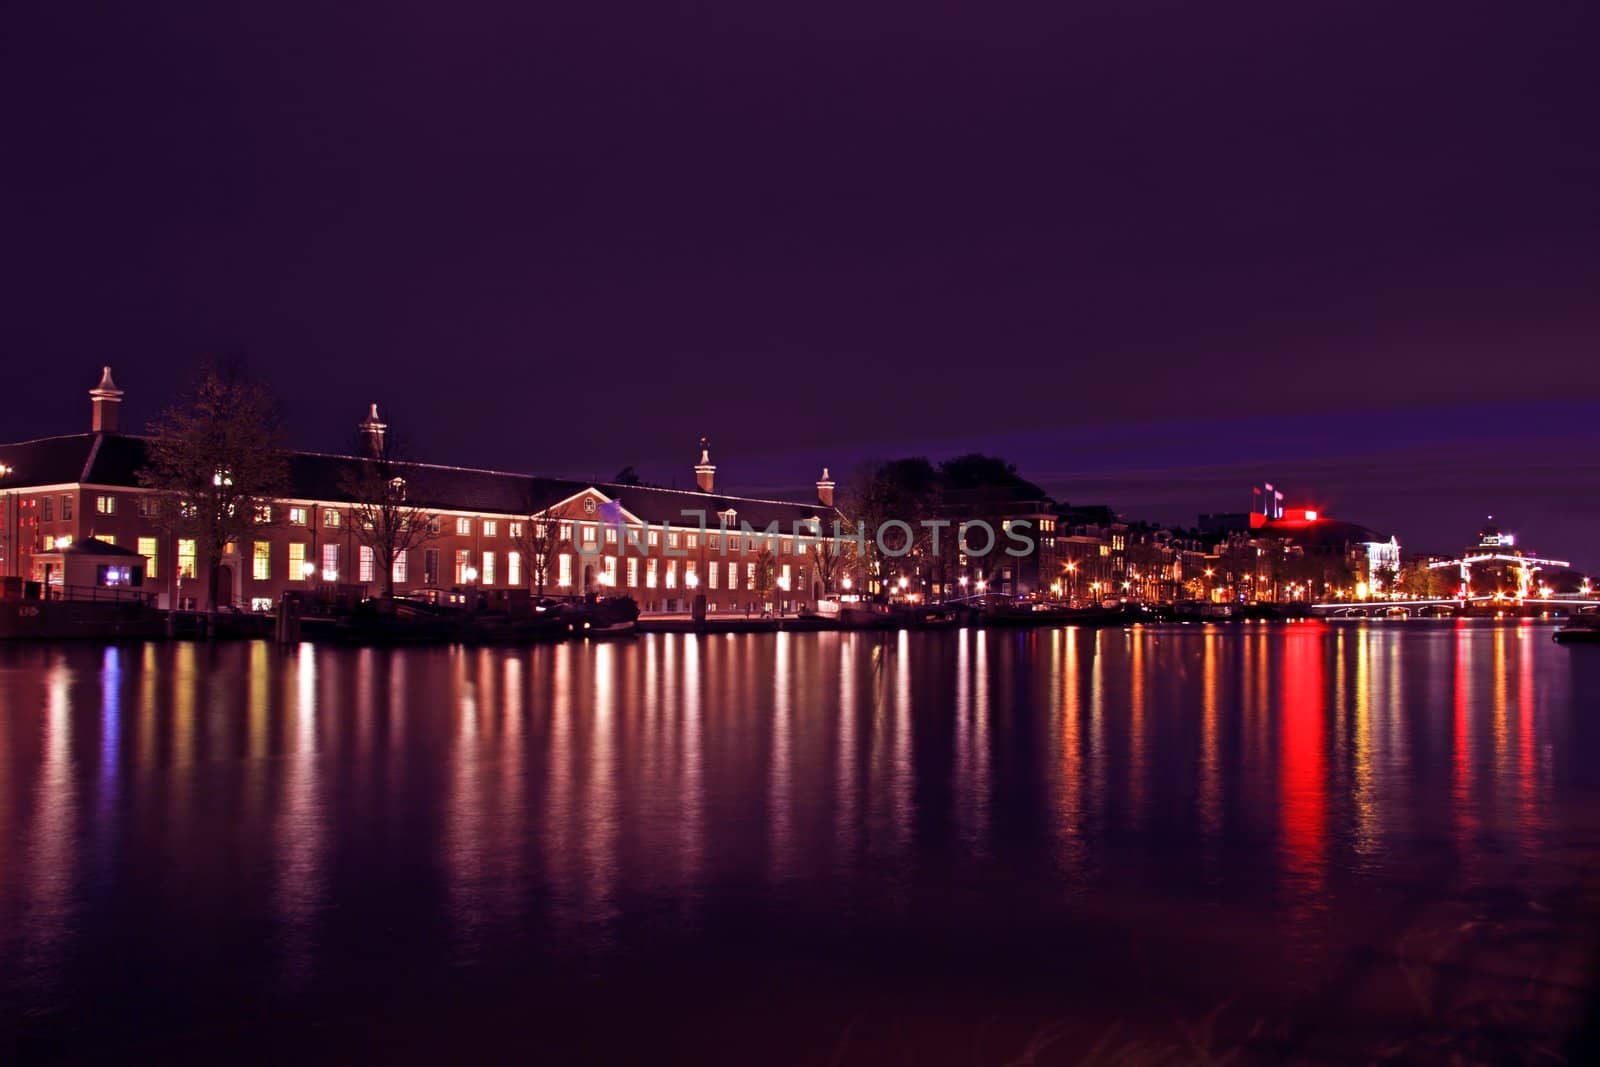 City scenic from Amsterdam in the Netherlands at night by devy